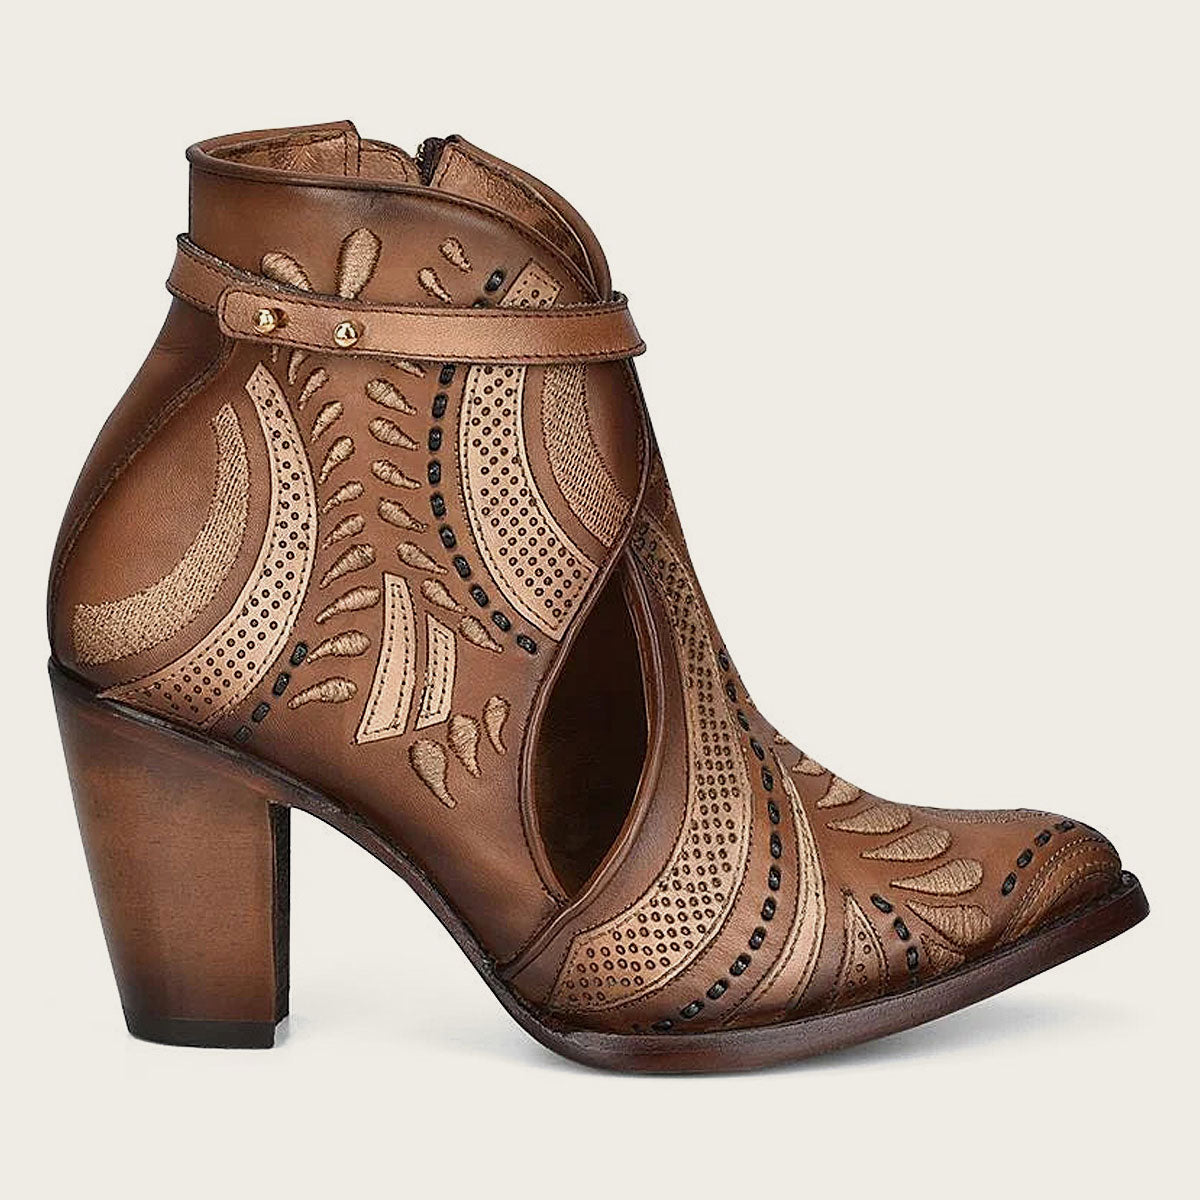 Embroidered and perforated in geometric motifs honey leather bootie